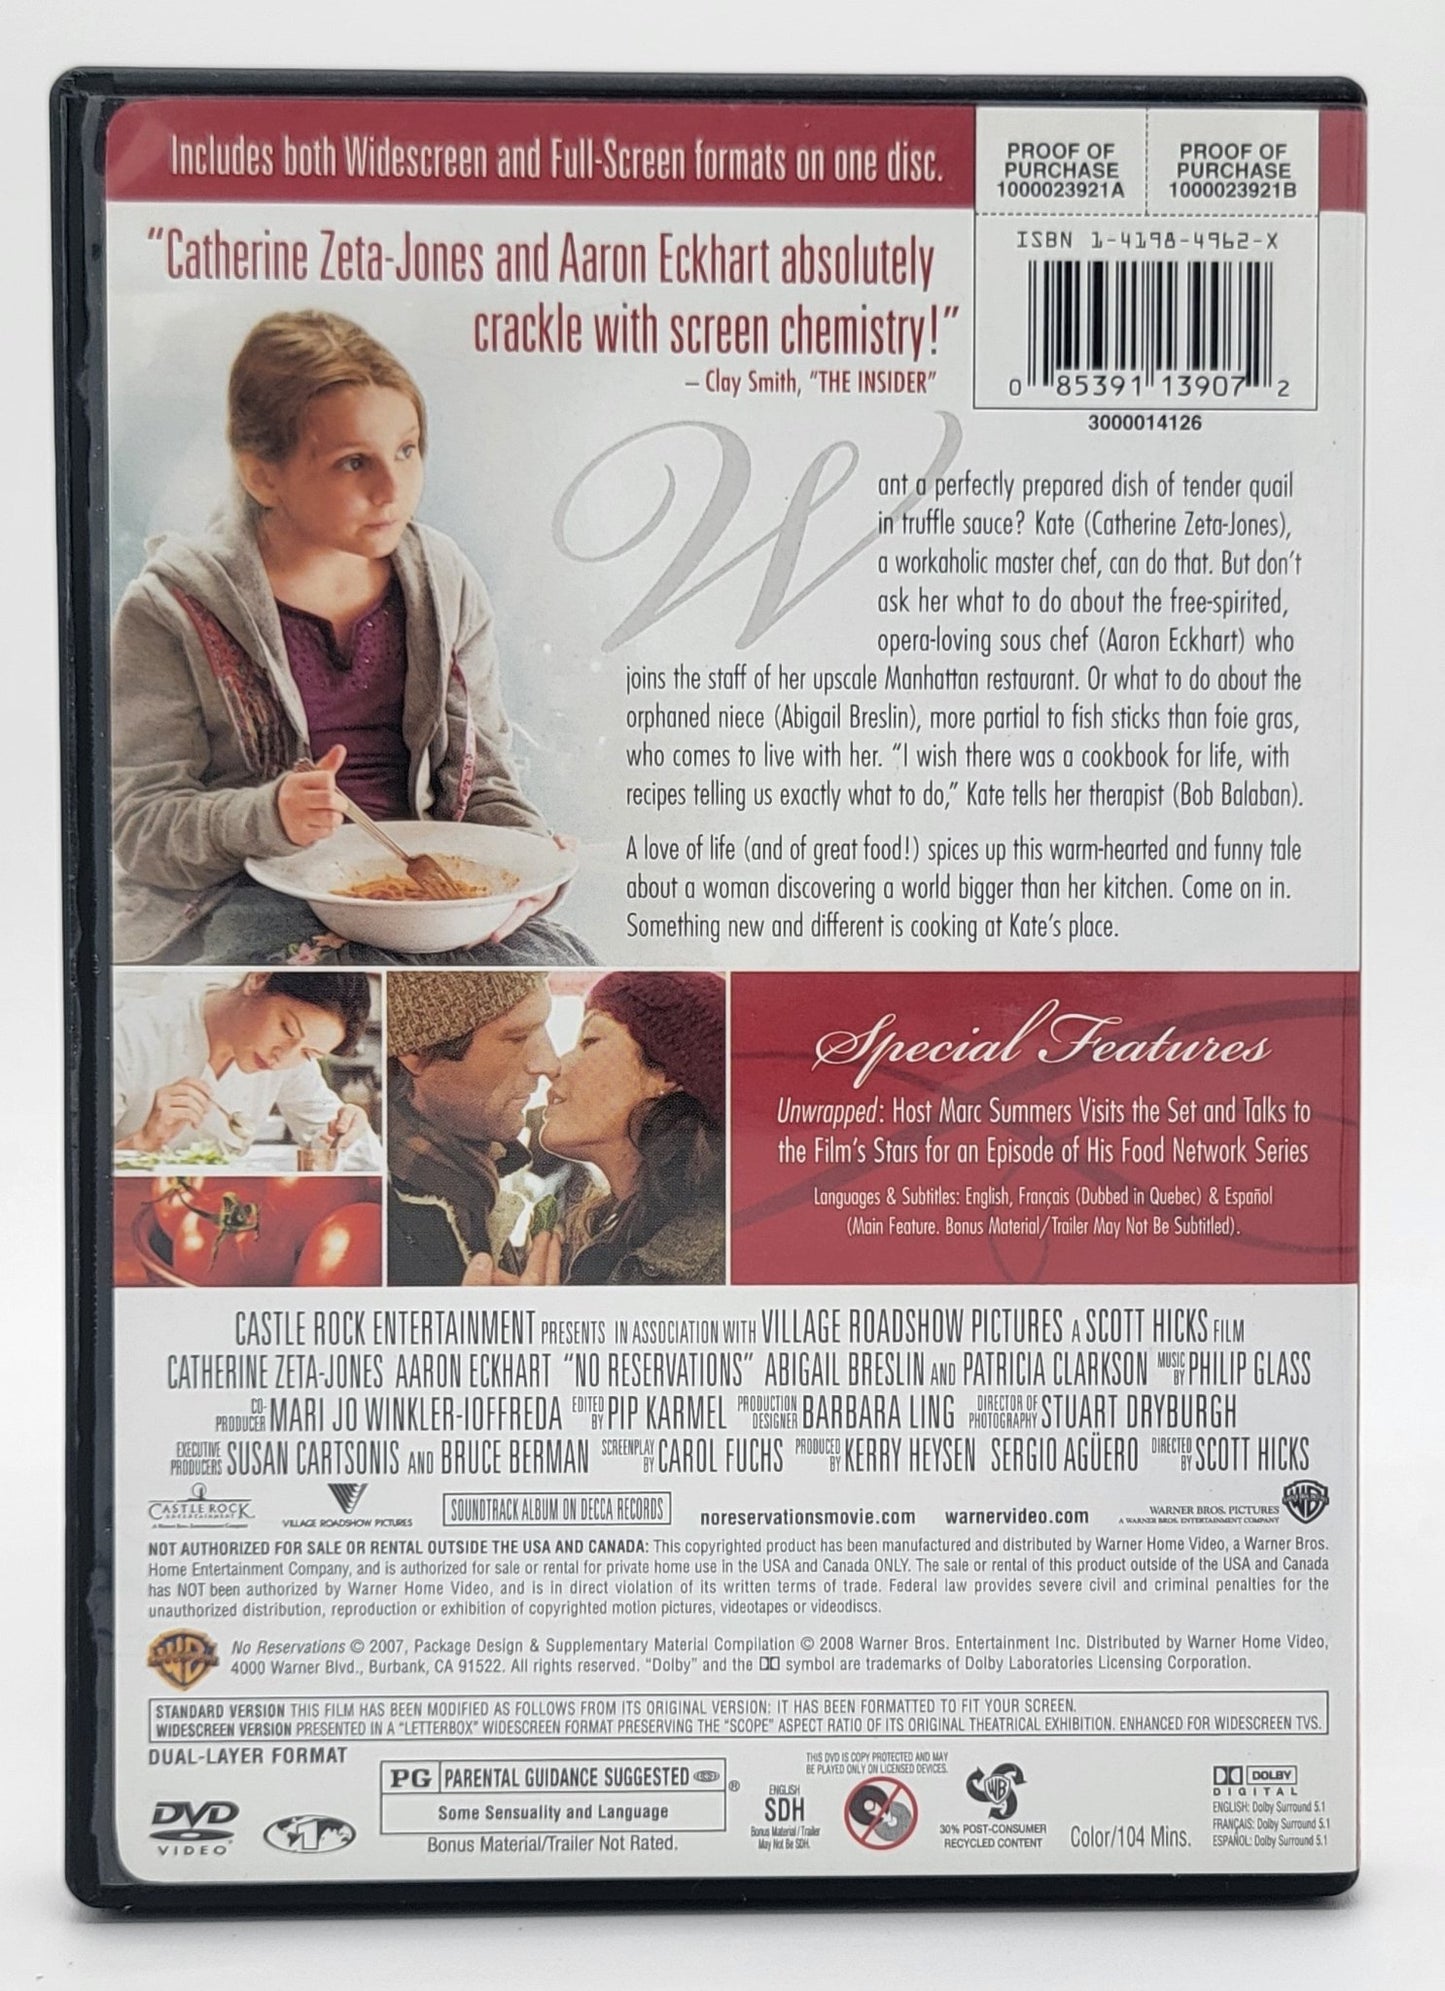 Warner Brothers - No Reservations | DVD | Widescreen & Standards - DVD - Steady Bunny Shop